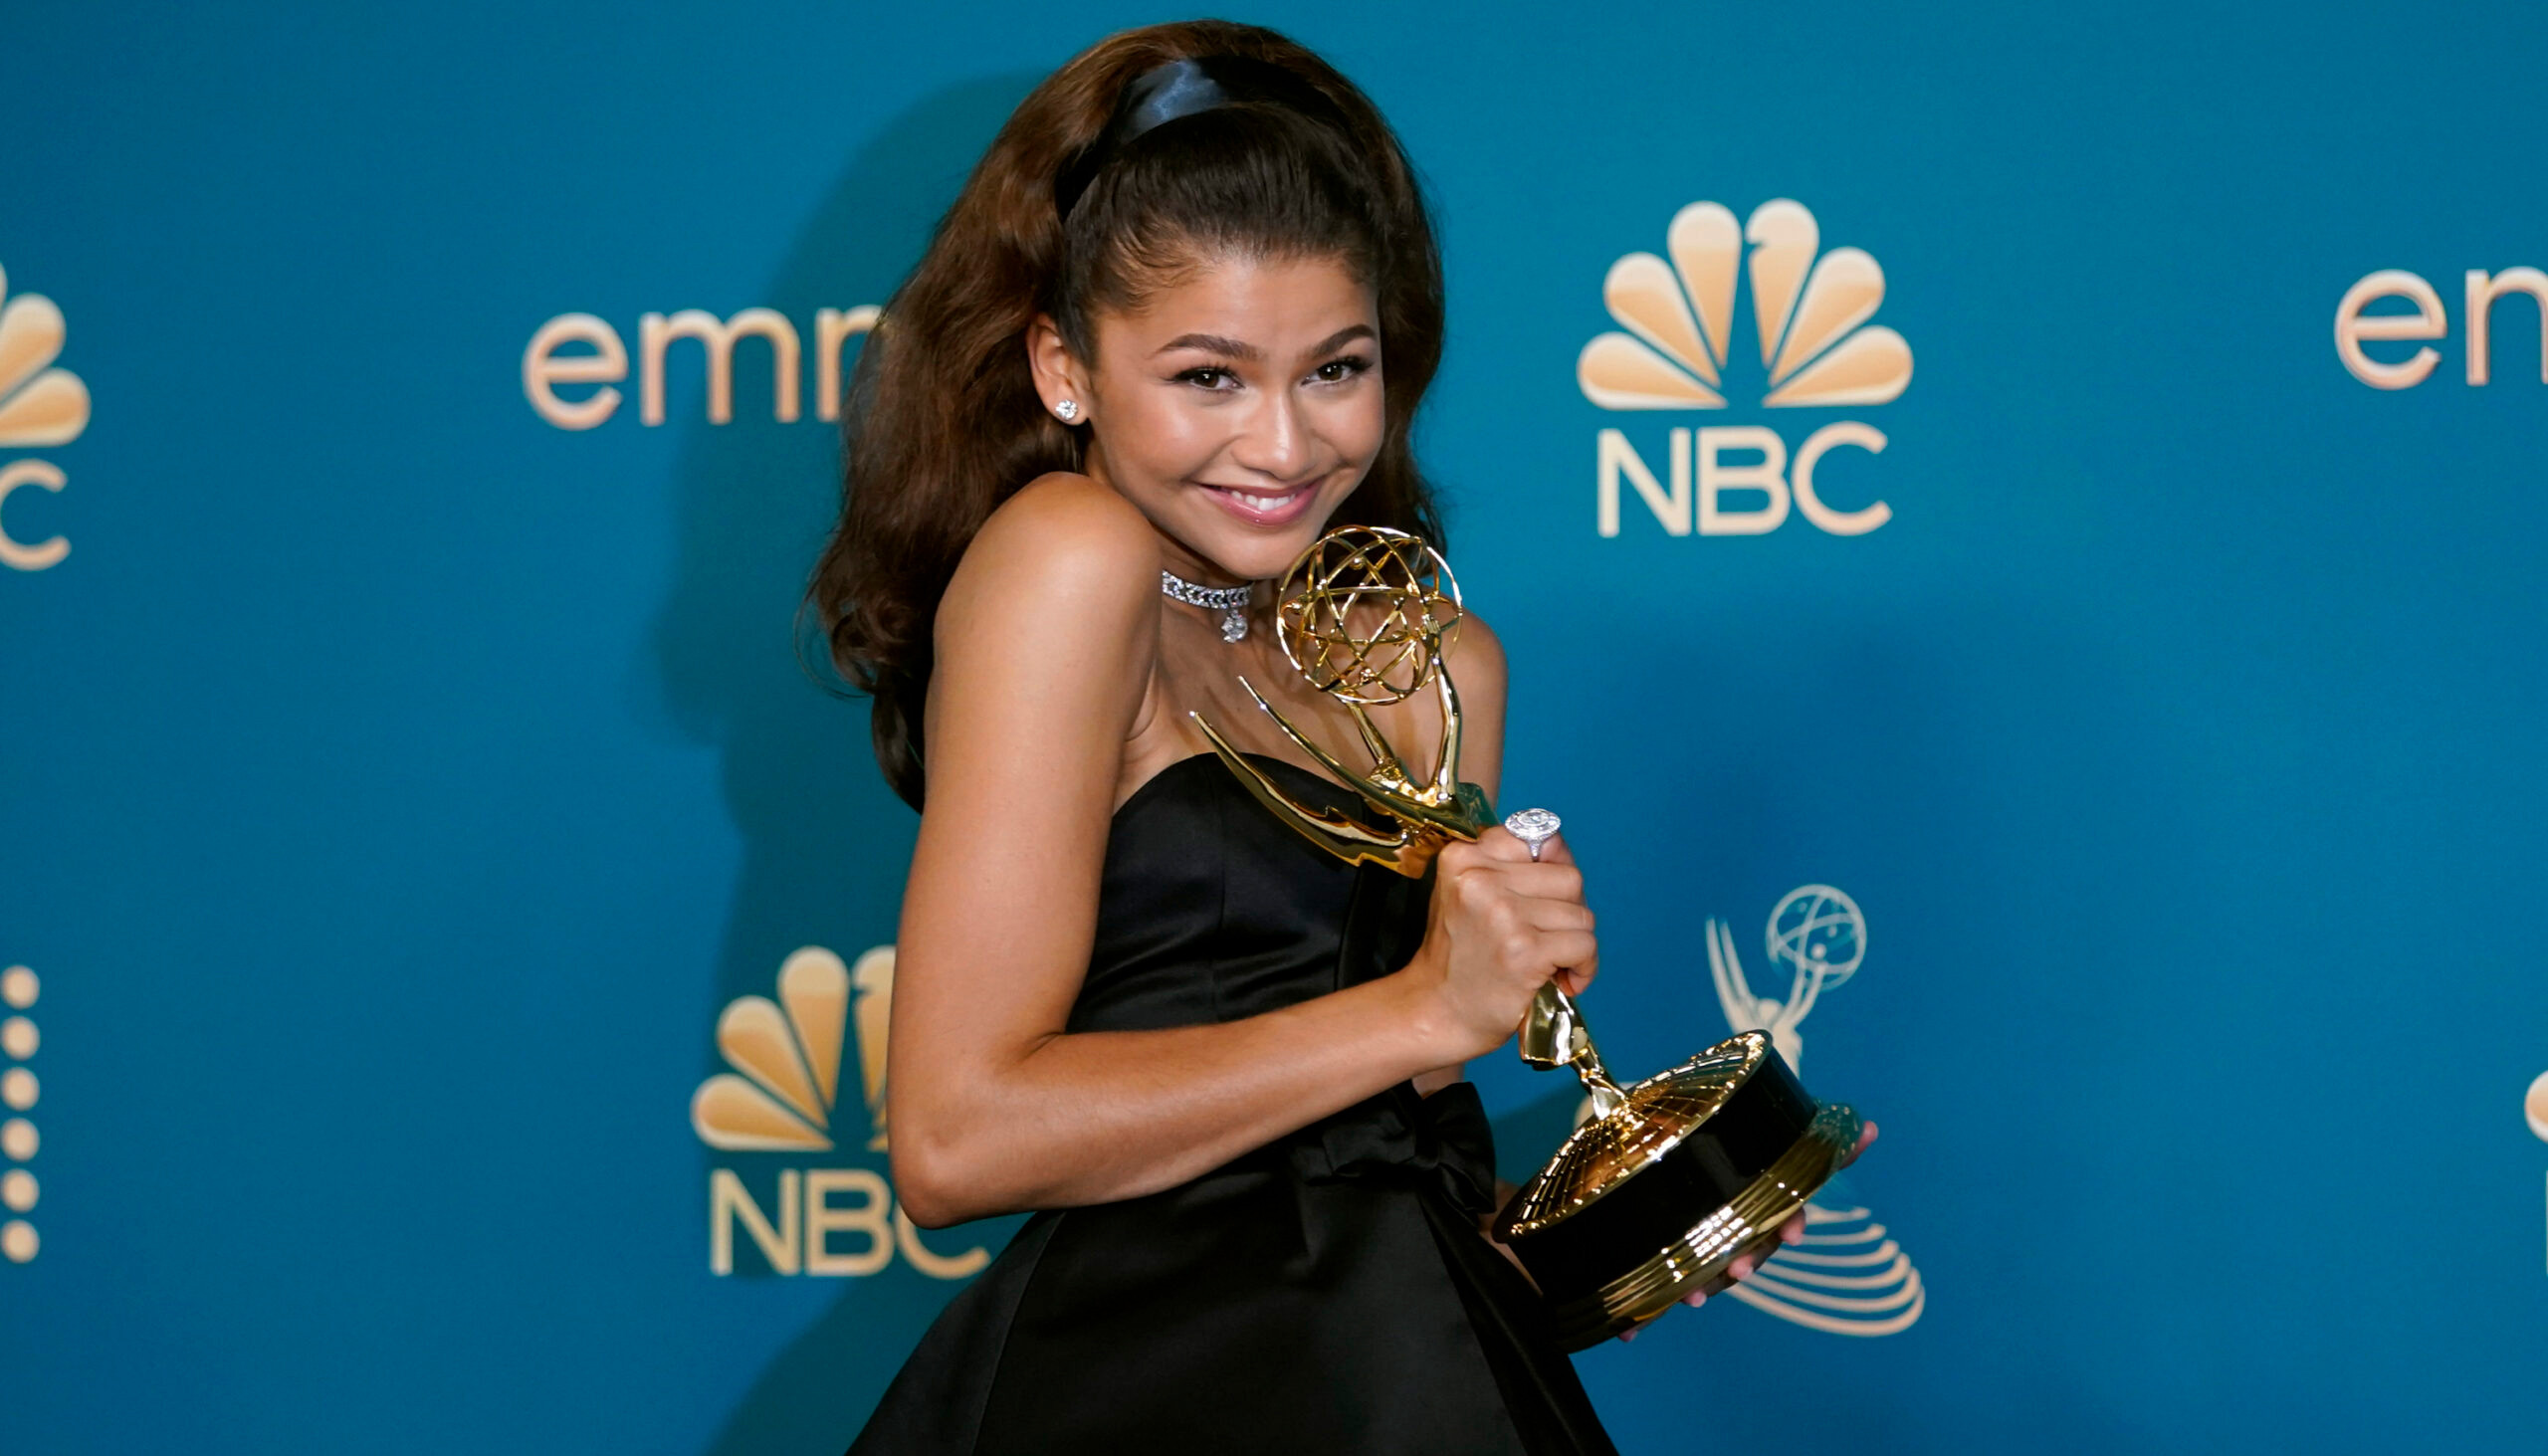 Zendaya over the moon after historic Emmy win: So, so, so grateful